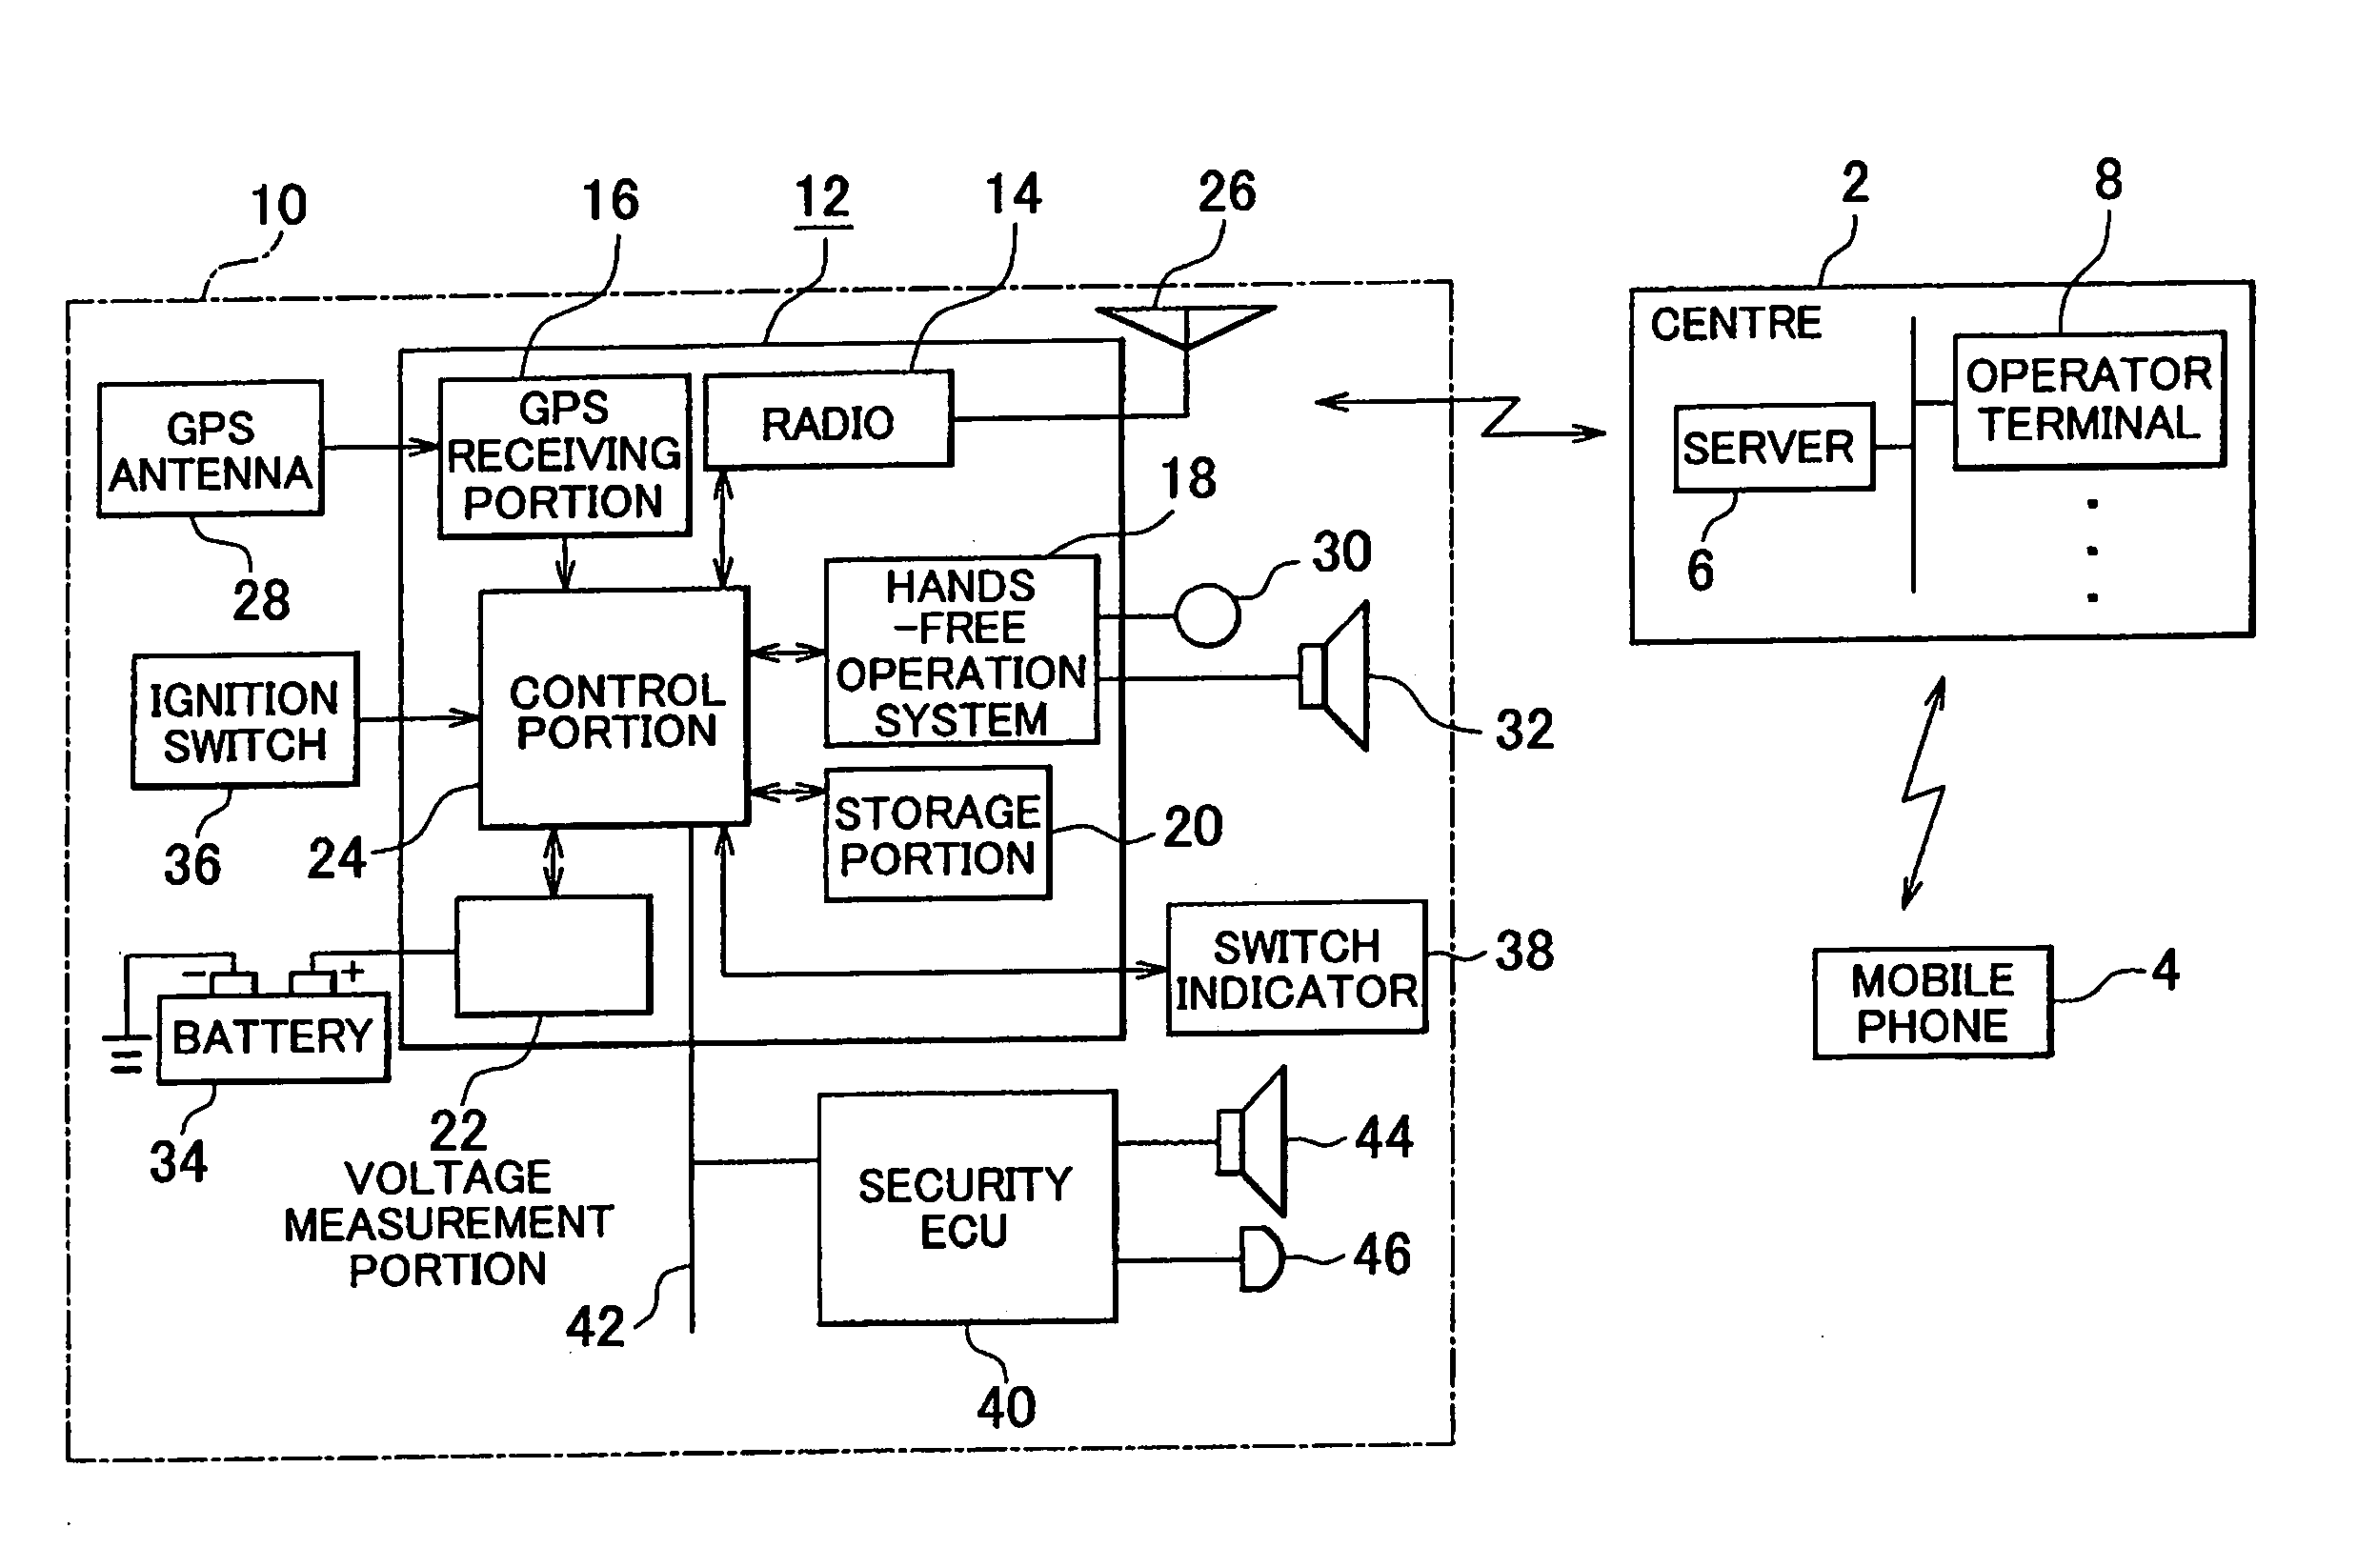 Apparatus for performance control of remote control operation service, and system and method for provision of same